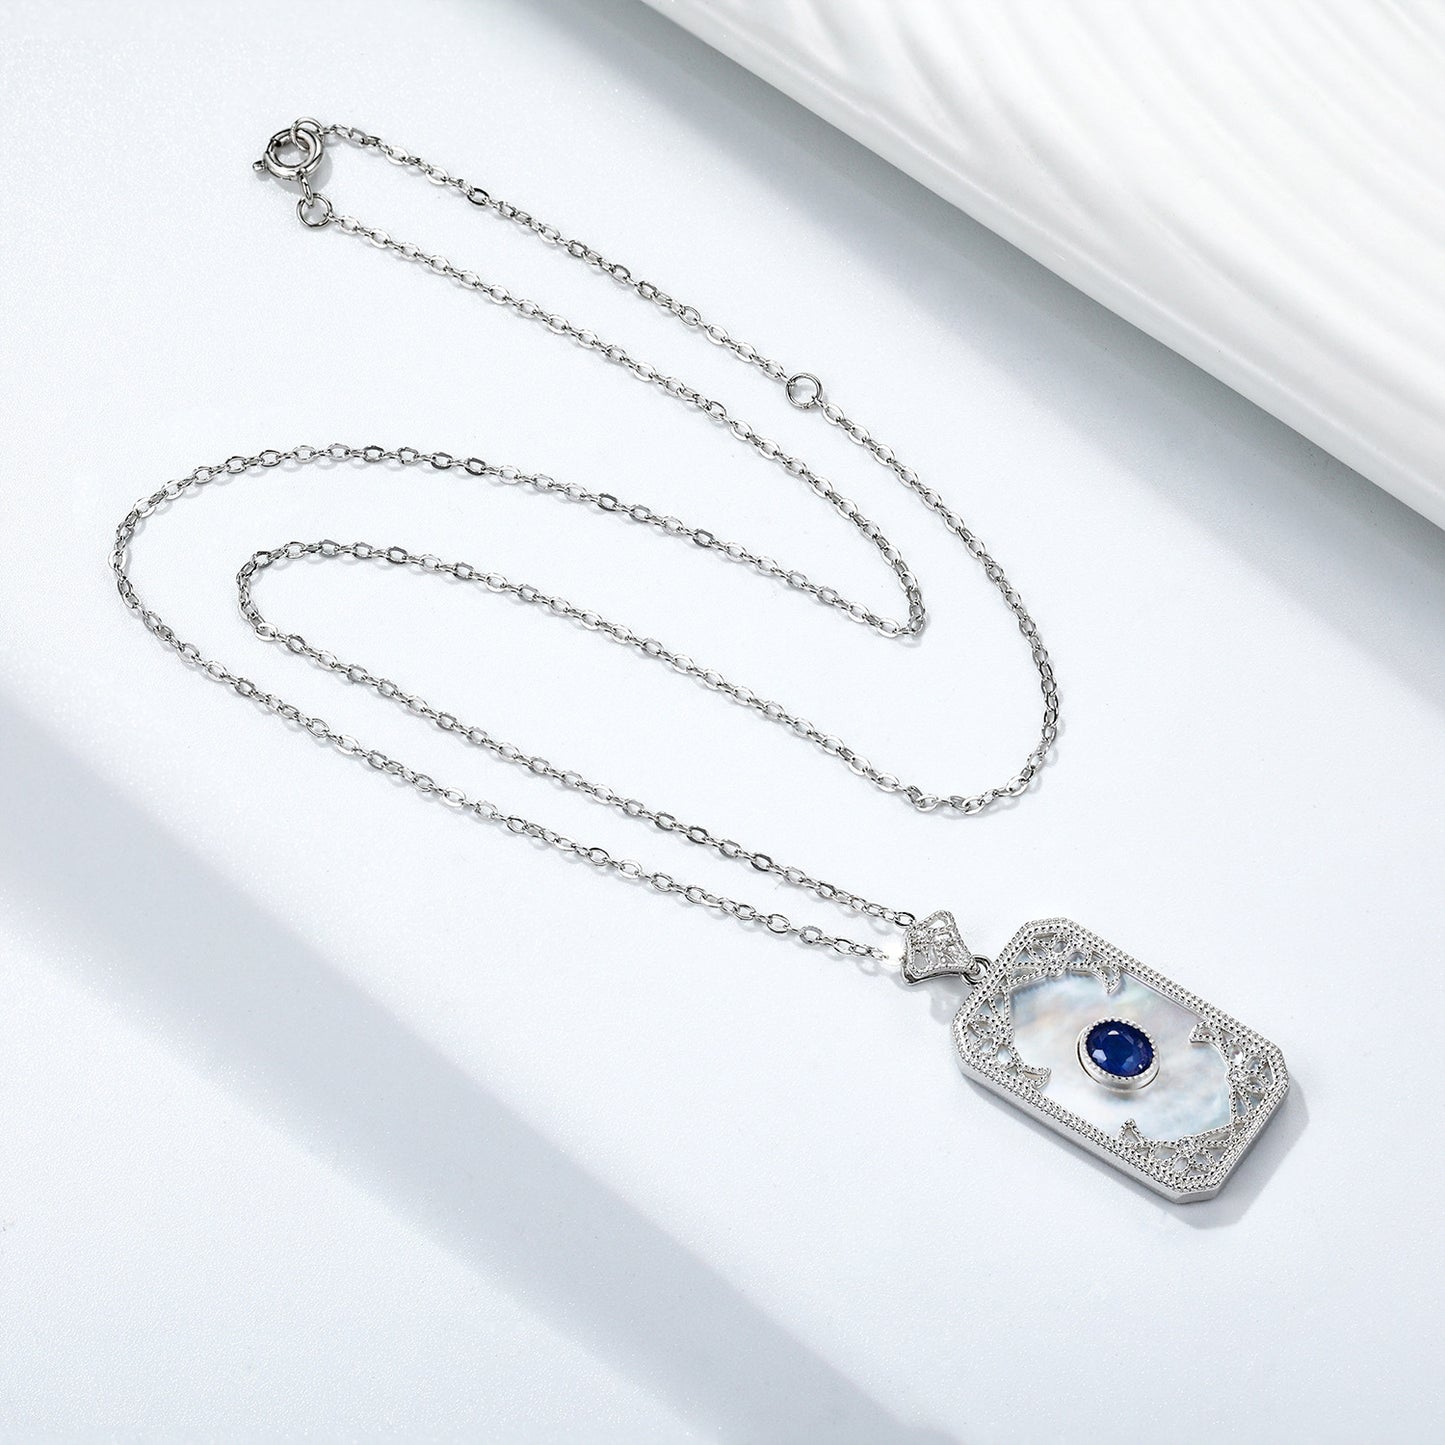 S925 Silver Inlaid Sapphire Necklace With Vintage Pattern Pendant Designed By A Natural Female Belle Pendant